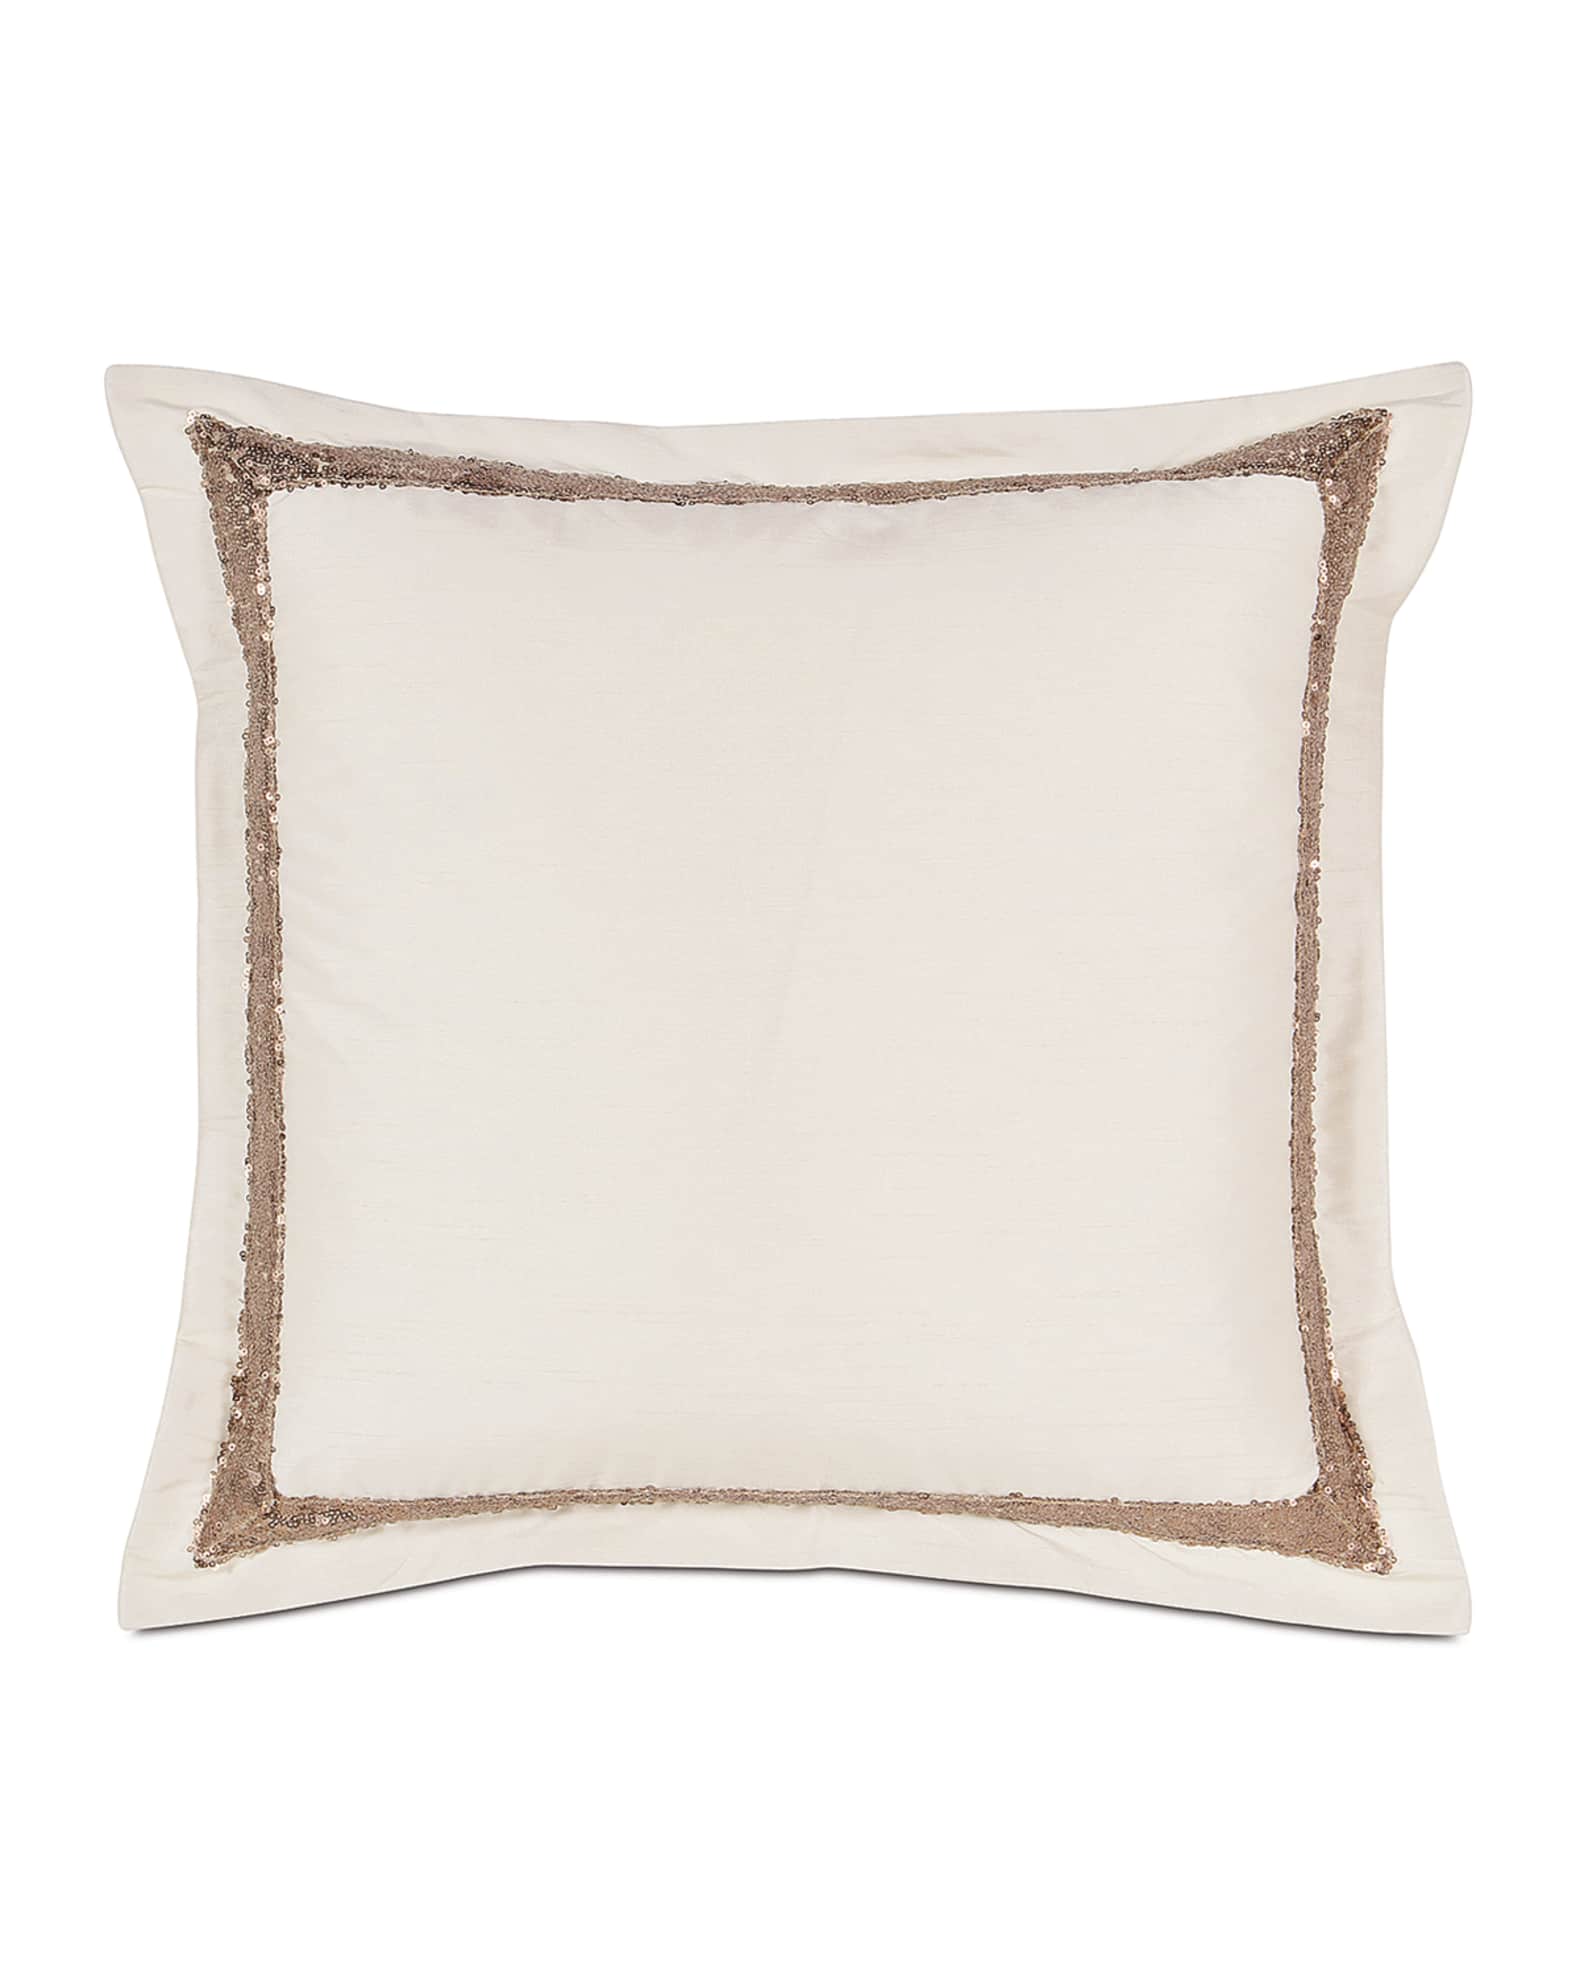 Eastern Accents Edris Ivory Decorative Pillow w/ Sequin Border